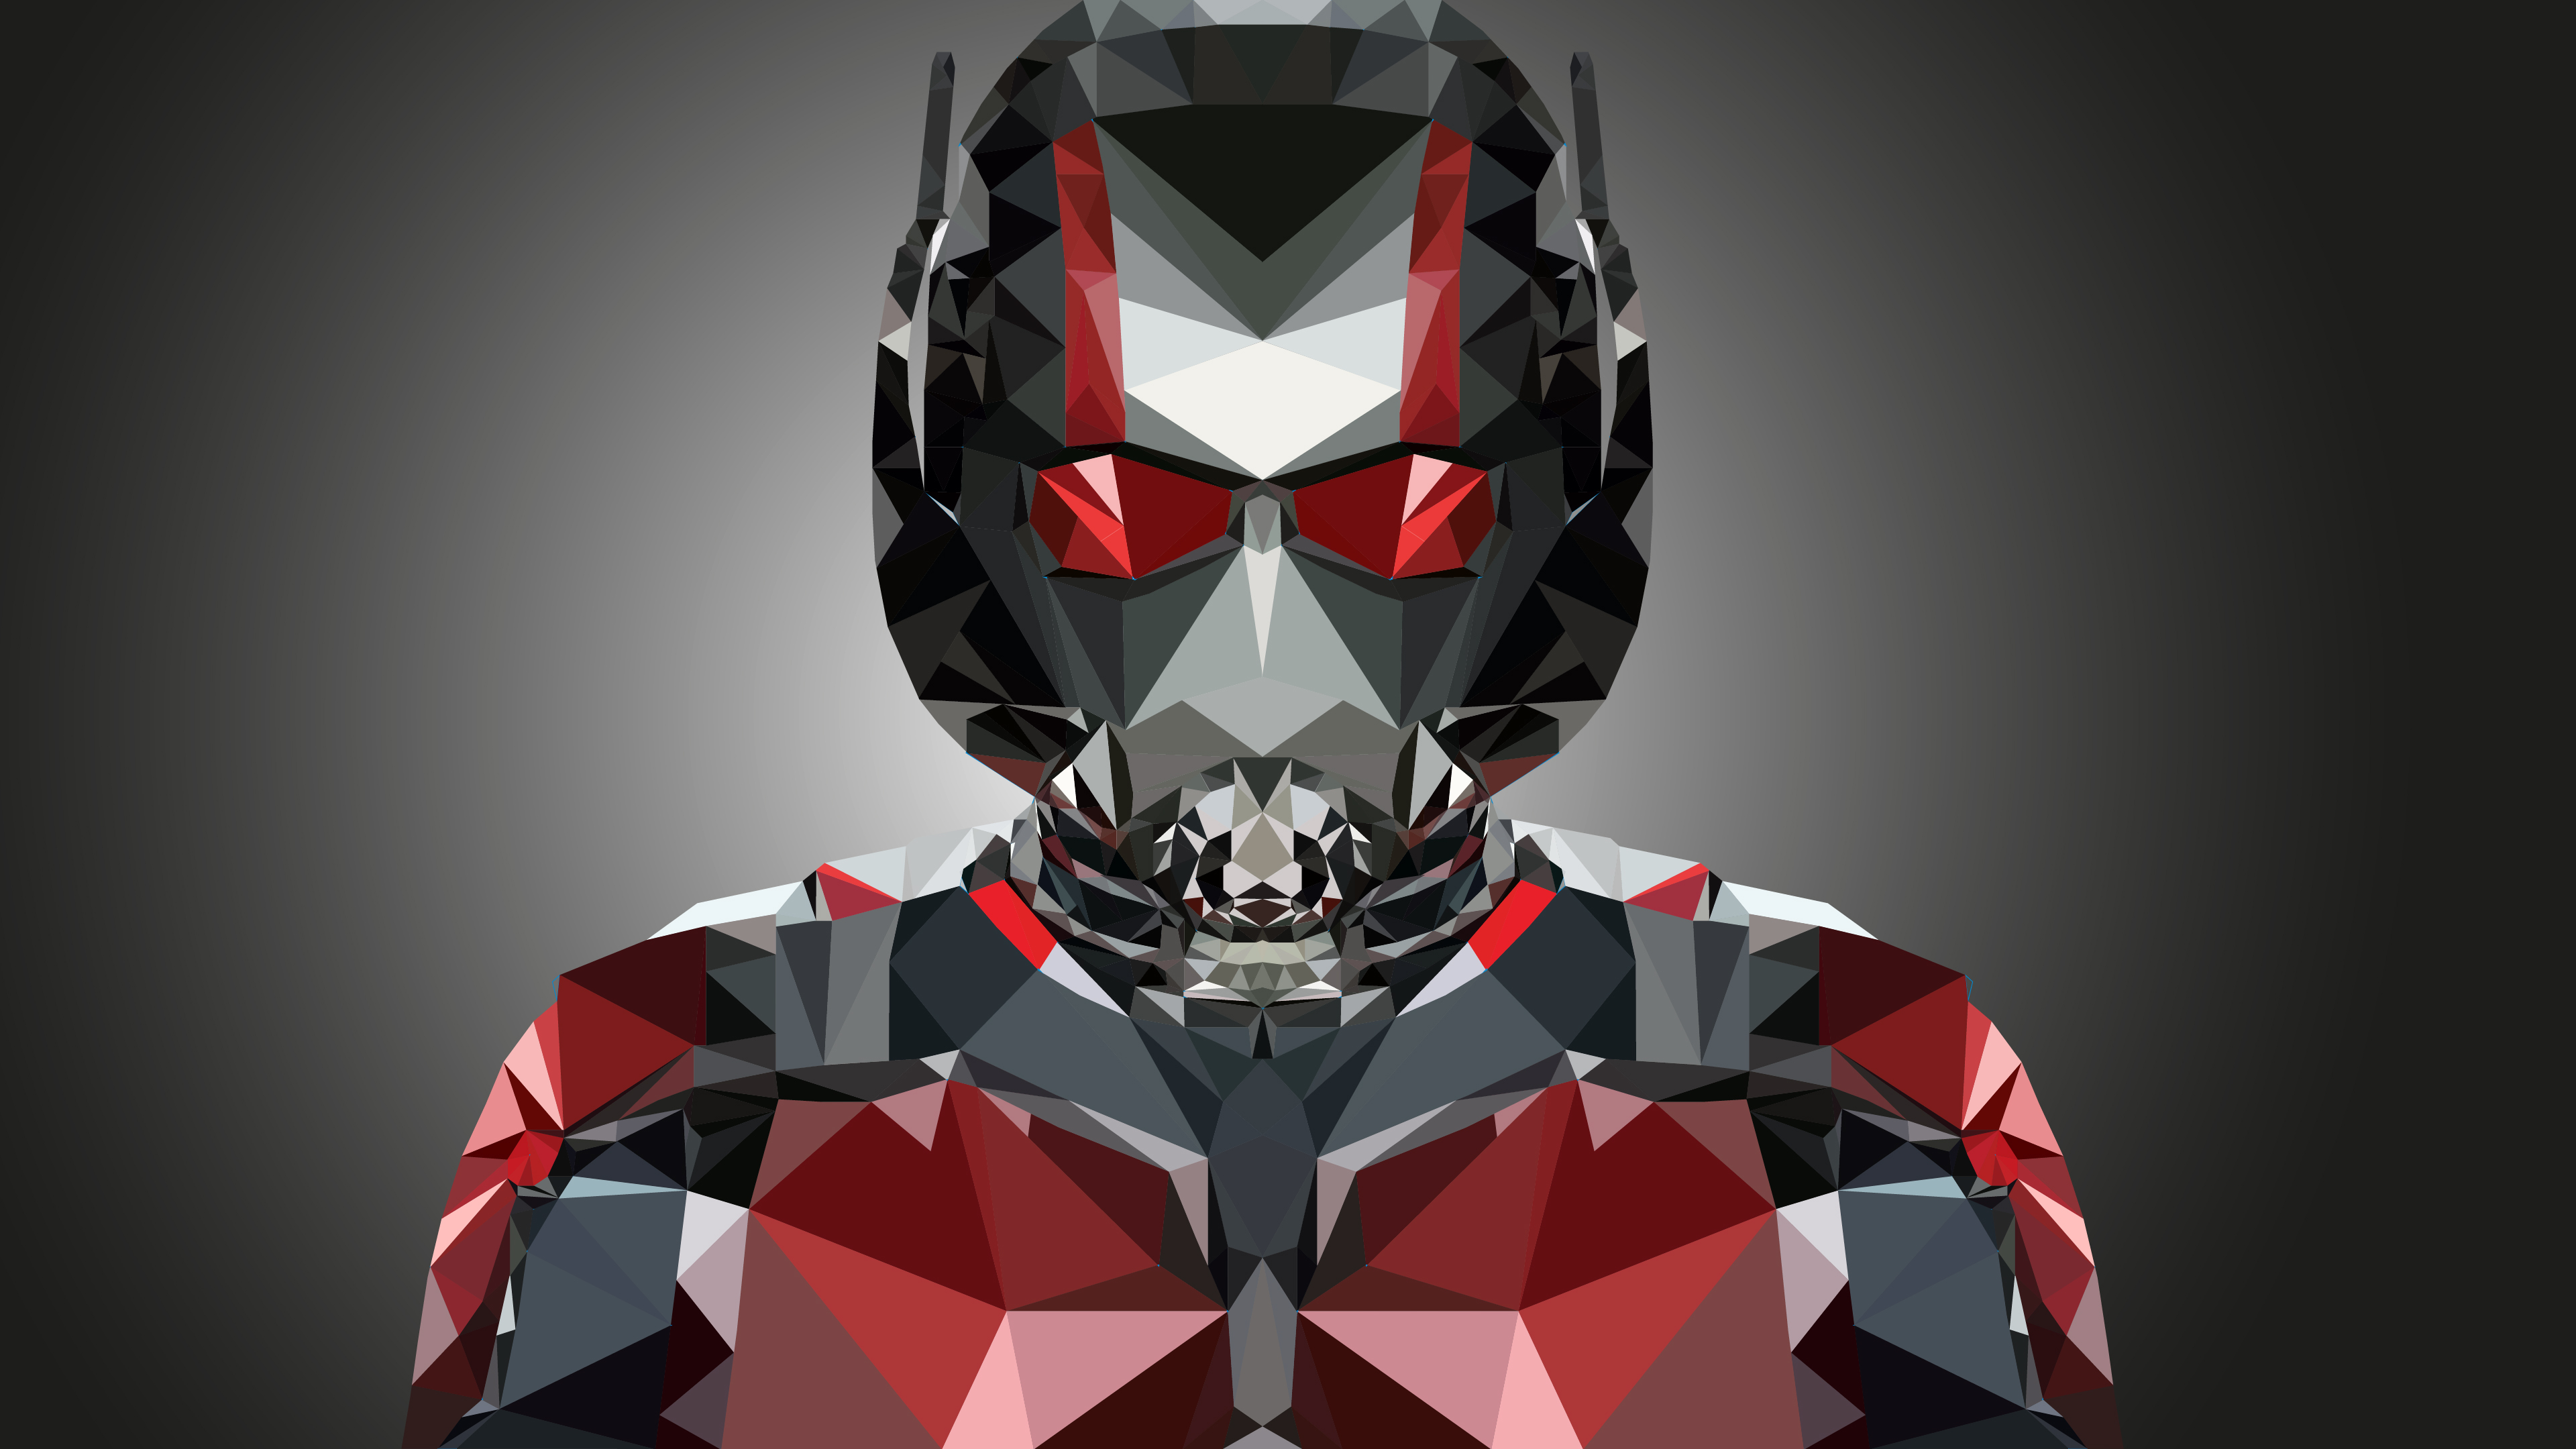 Ant Man Polygonal Portrait Illustration, HD Superheroes, 4k Wallpapers,  Images, Backgrounds, Photos and Pictures